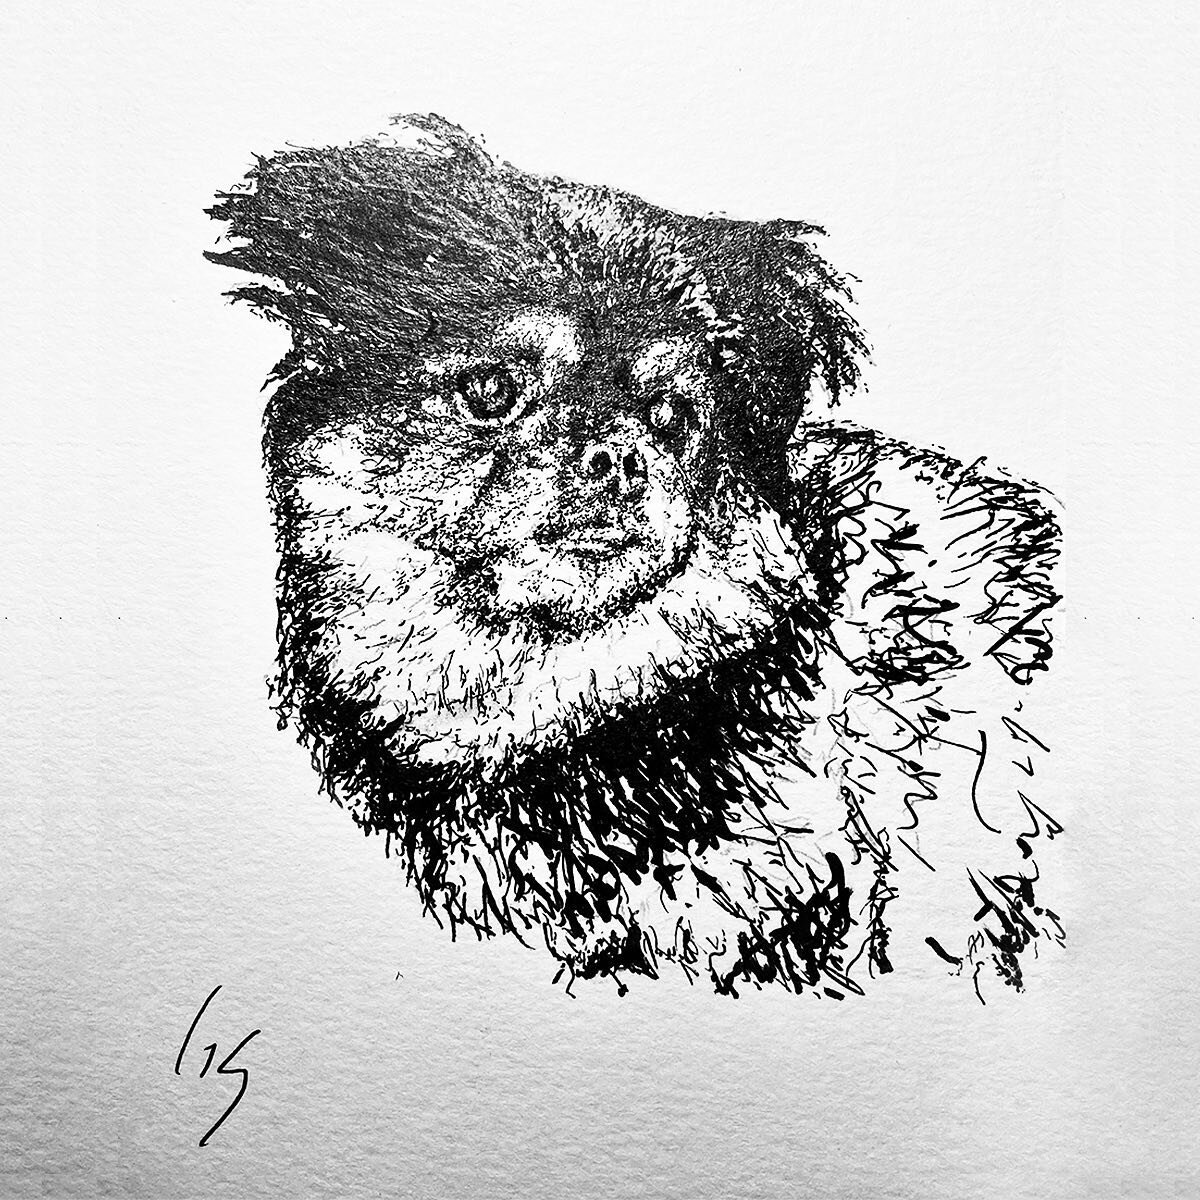 My latest commission /
For memory of the late pup, Katie, this piece was gifted to her owner to celebrate her life. 

Projects like these are rewarding. 

Swipe to see my process and the original photo. 

#penandink #blackandwhite #dogdrawing #pendra